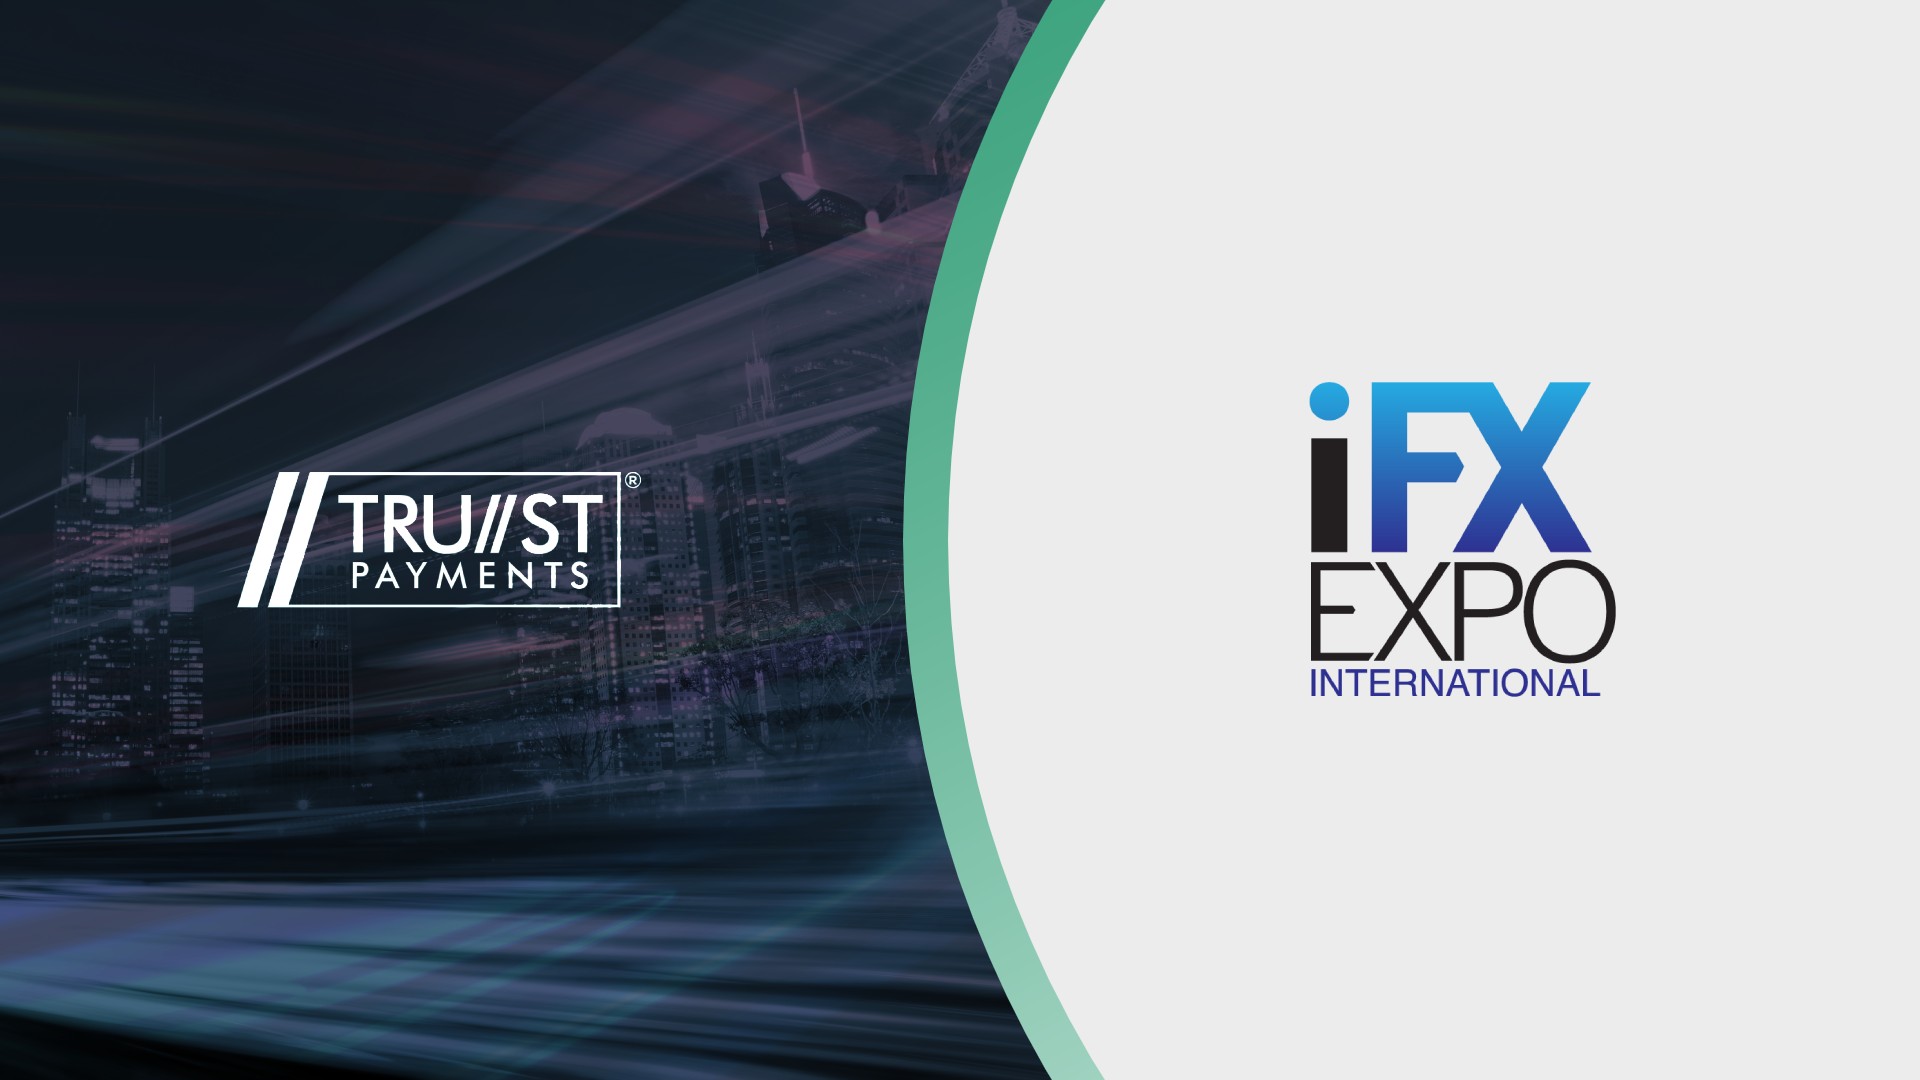 Come and see Trust Payments at the iFX EXPO International 